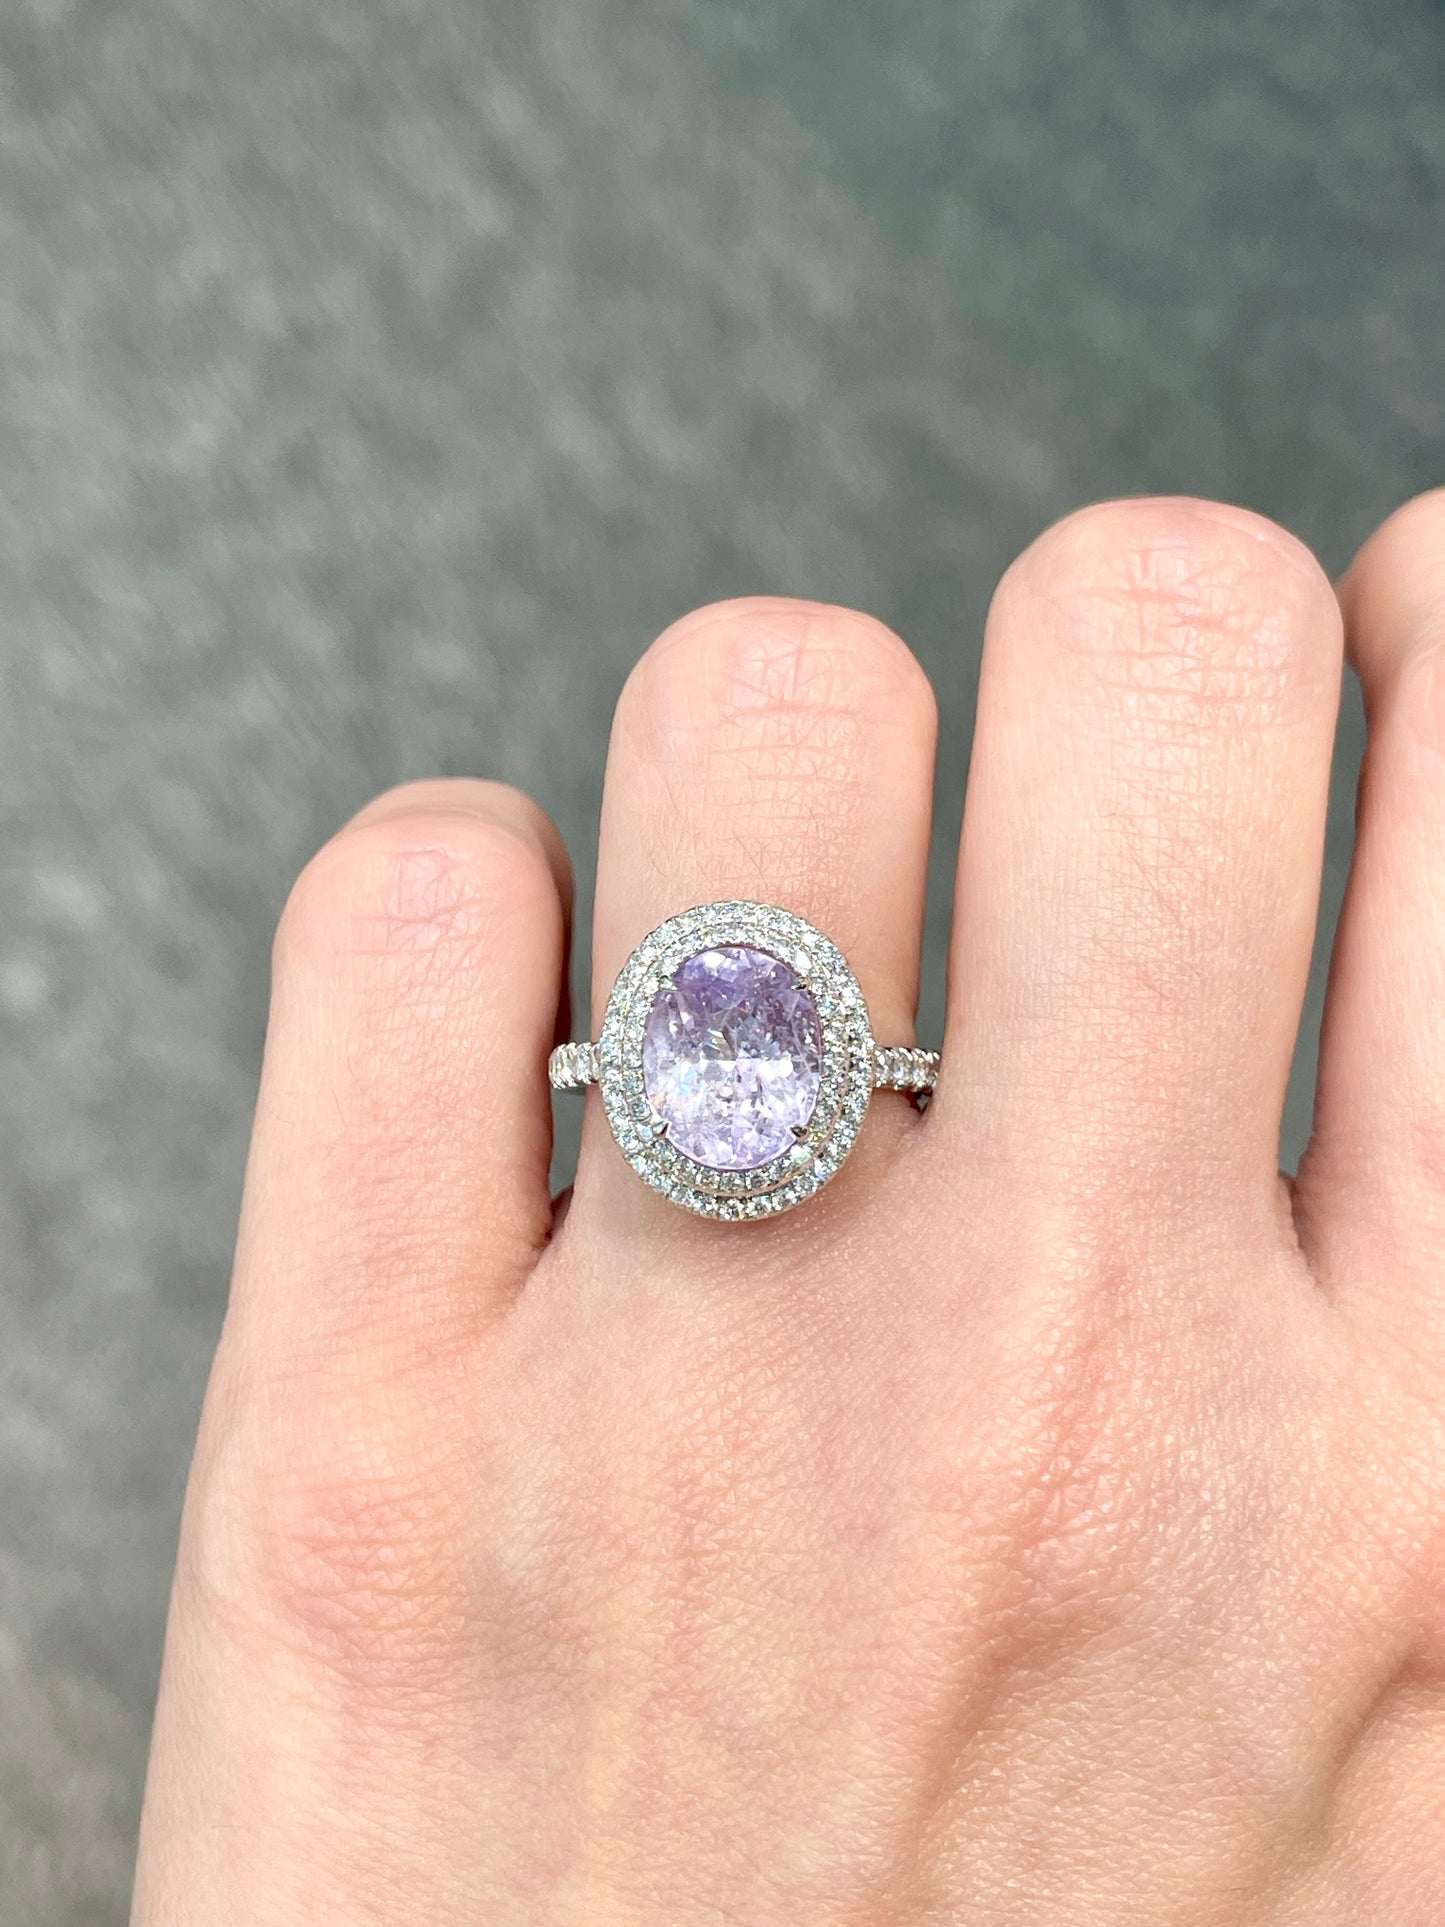 Natural Unheated Light Purple Sapphire 3.78ct Ring Set With Natural Diamond In 18K White Gold Singapore Gemstone Fine Jewellery